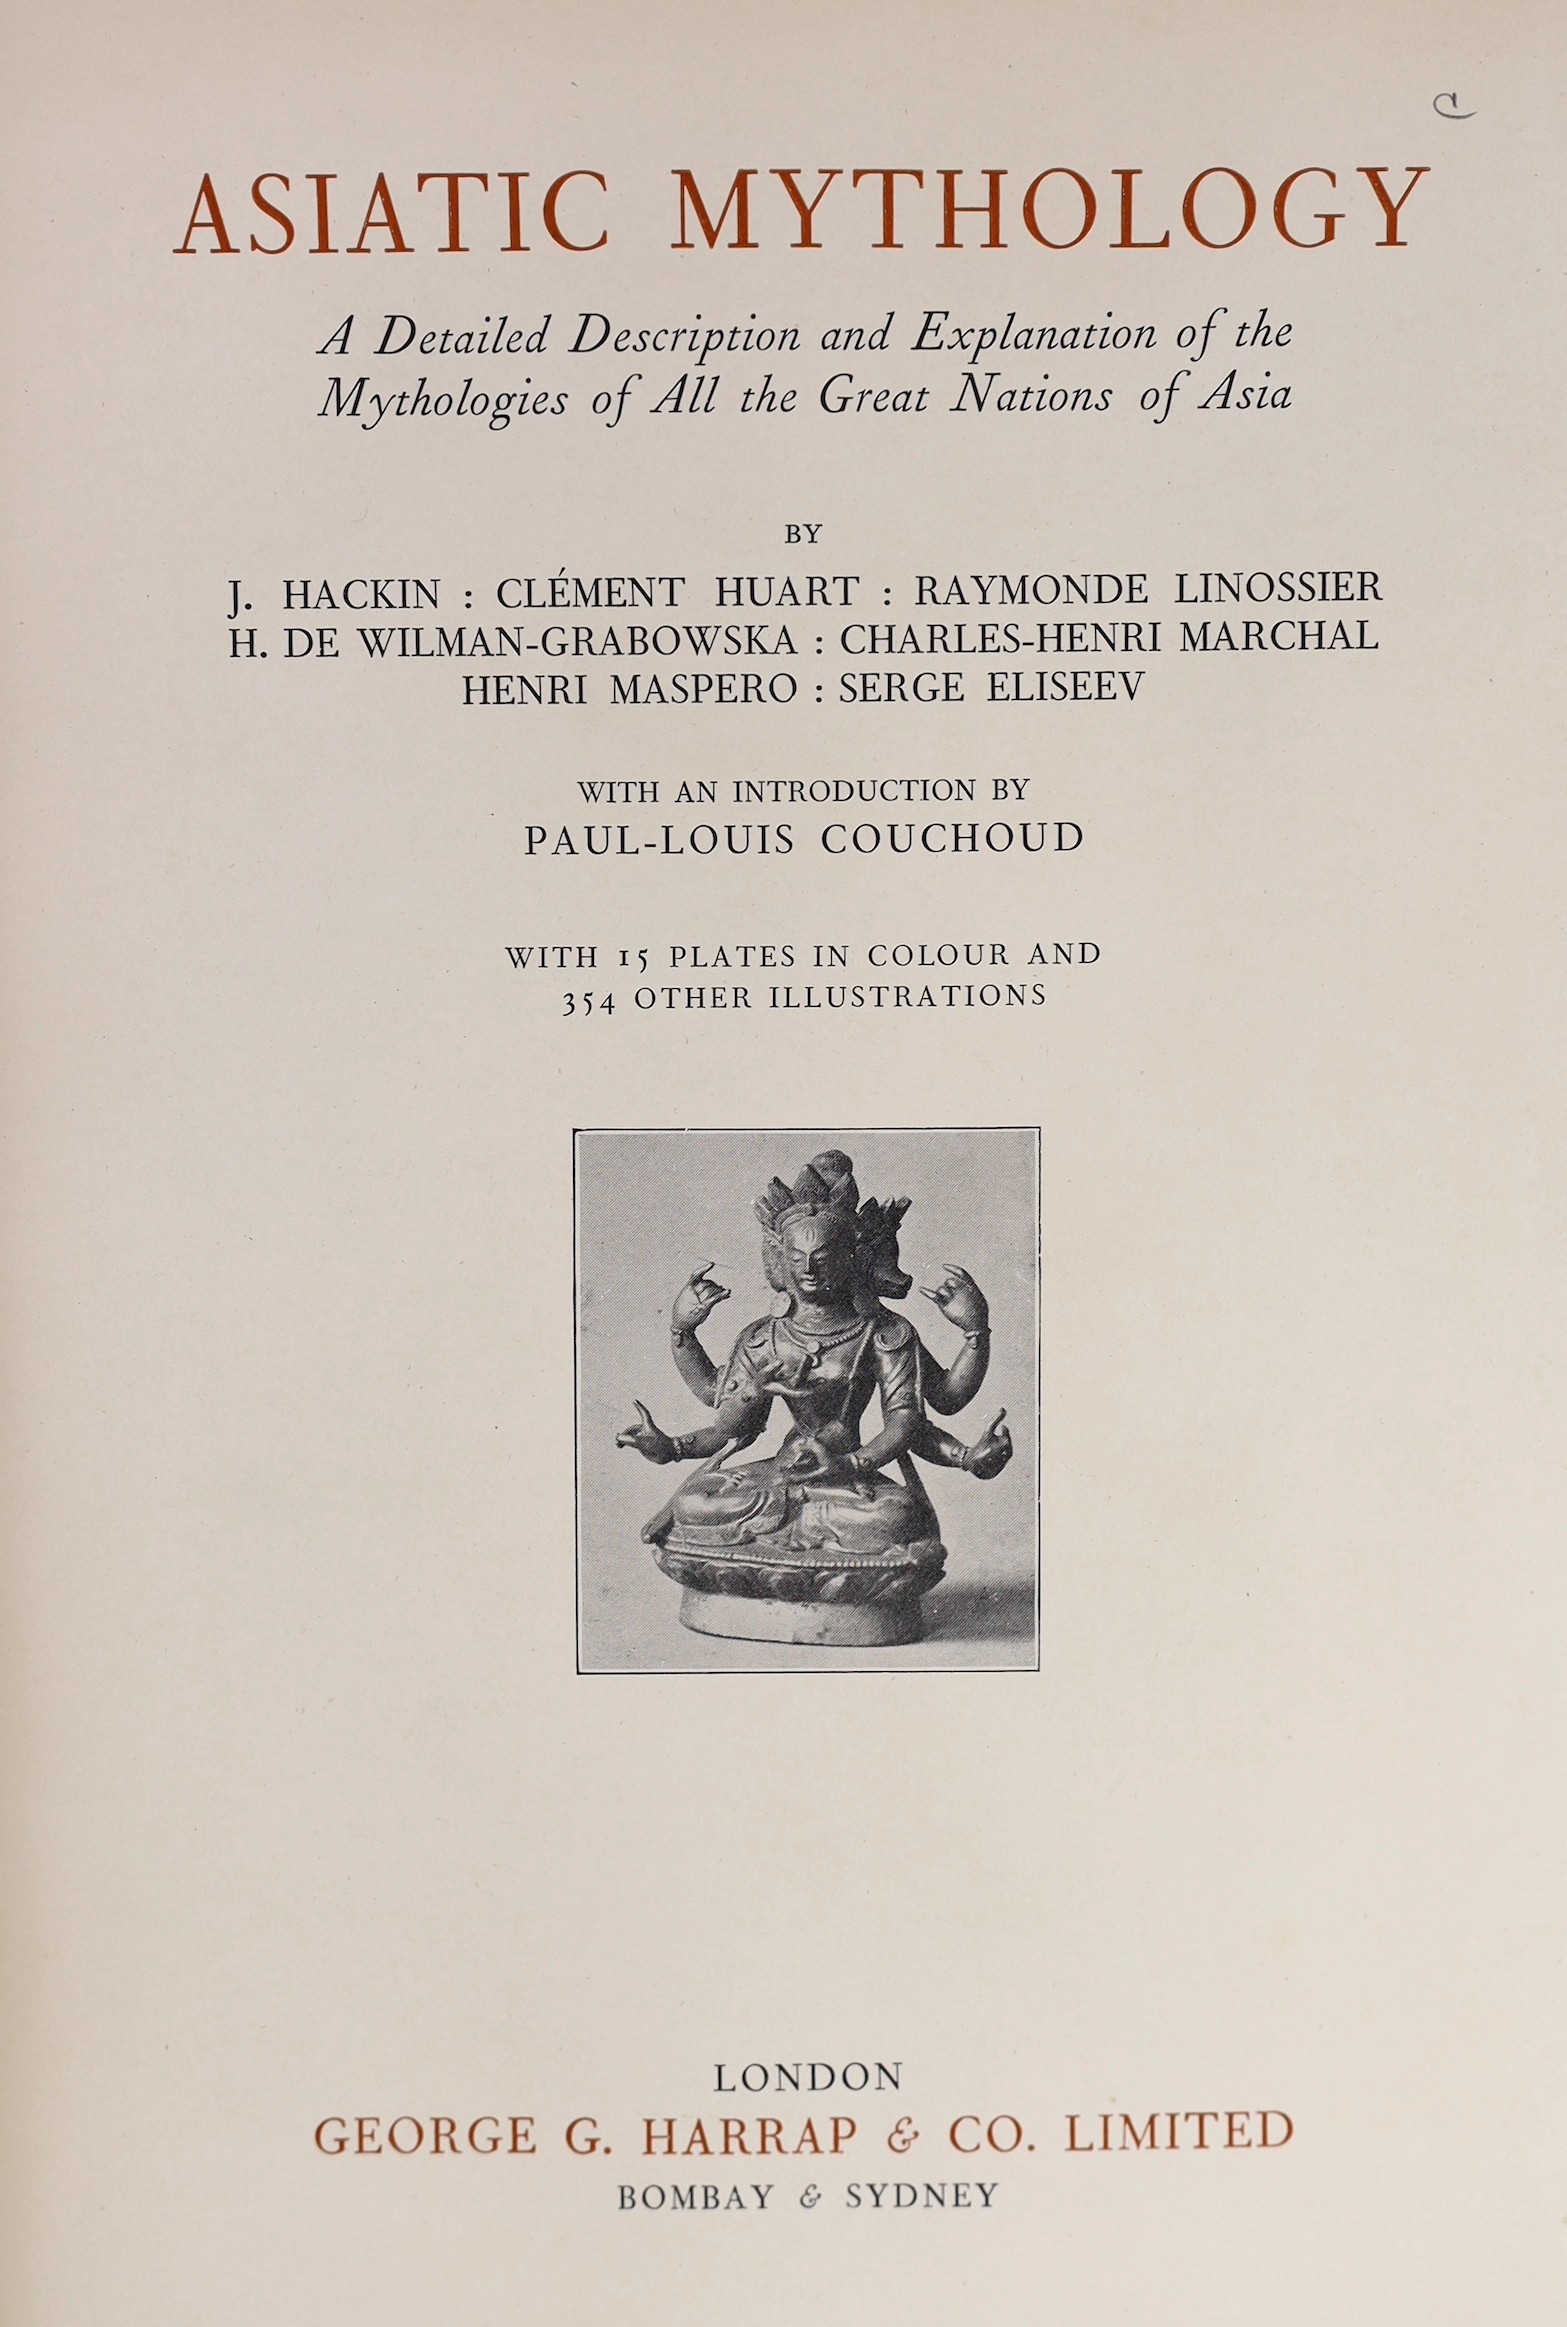 Hackin, J. - Huart, CLement & Others - Asiastic Mythology: a detailed description and explanation ... With an introduction by Paul-Louis Couchoud. (from the library of Cecil B. De Mille), 15 coloured plates and many othe